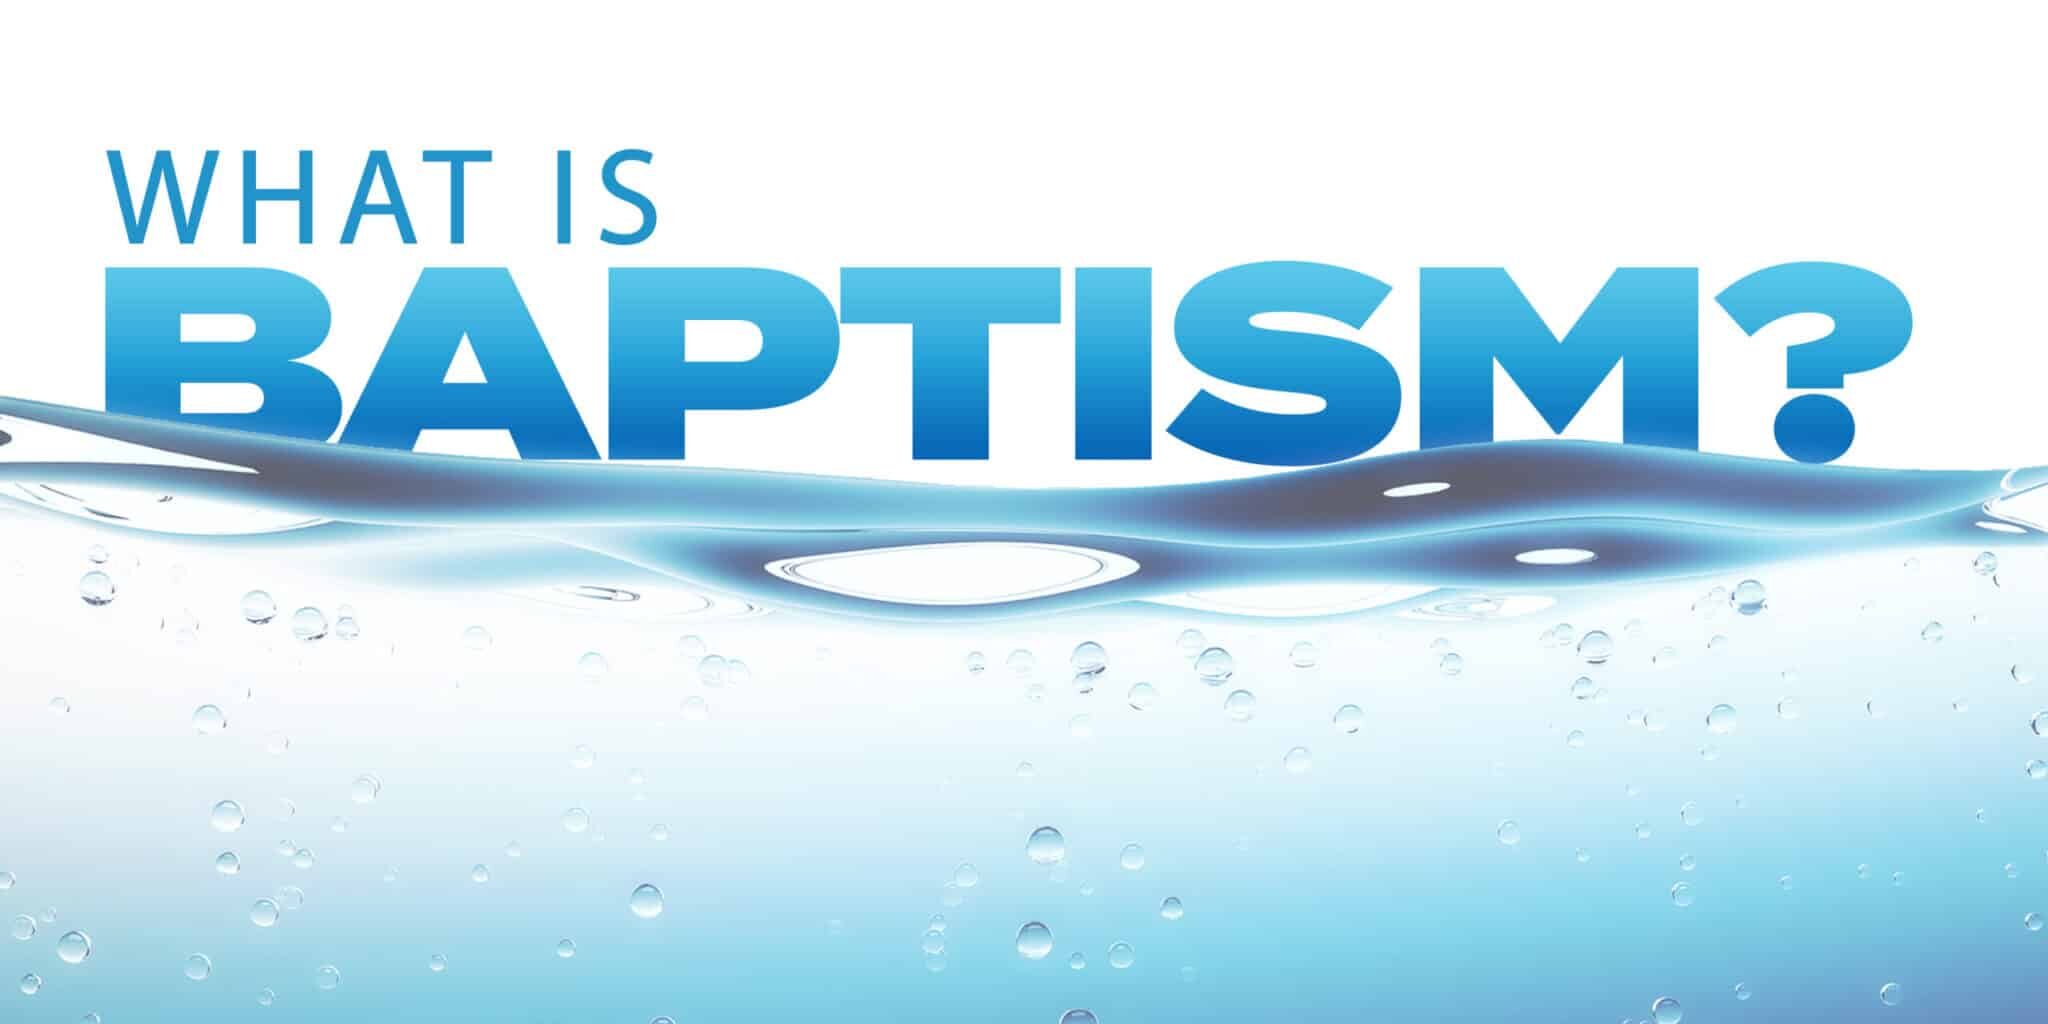 essay on what is baptism